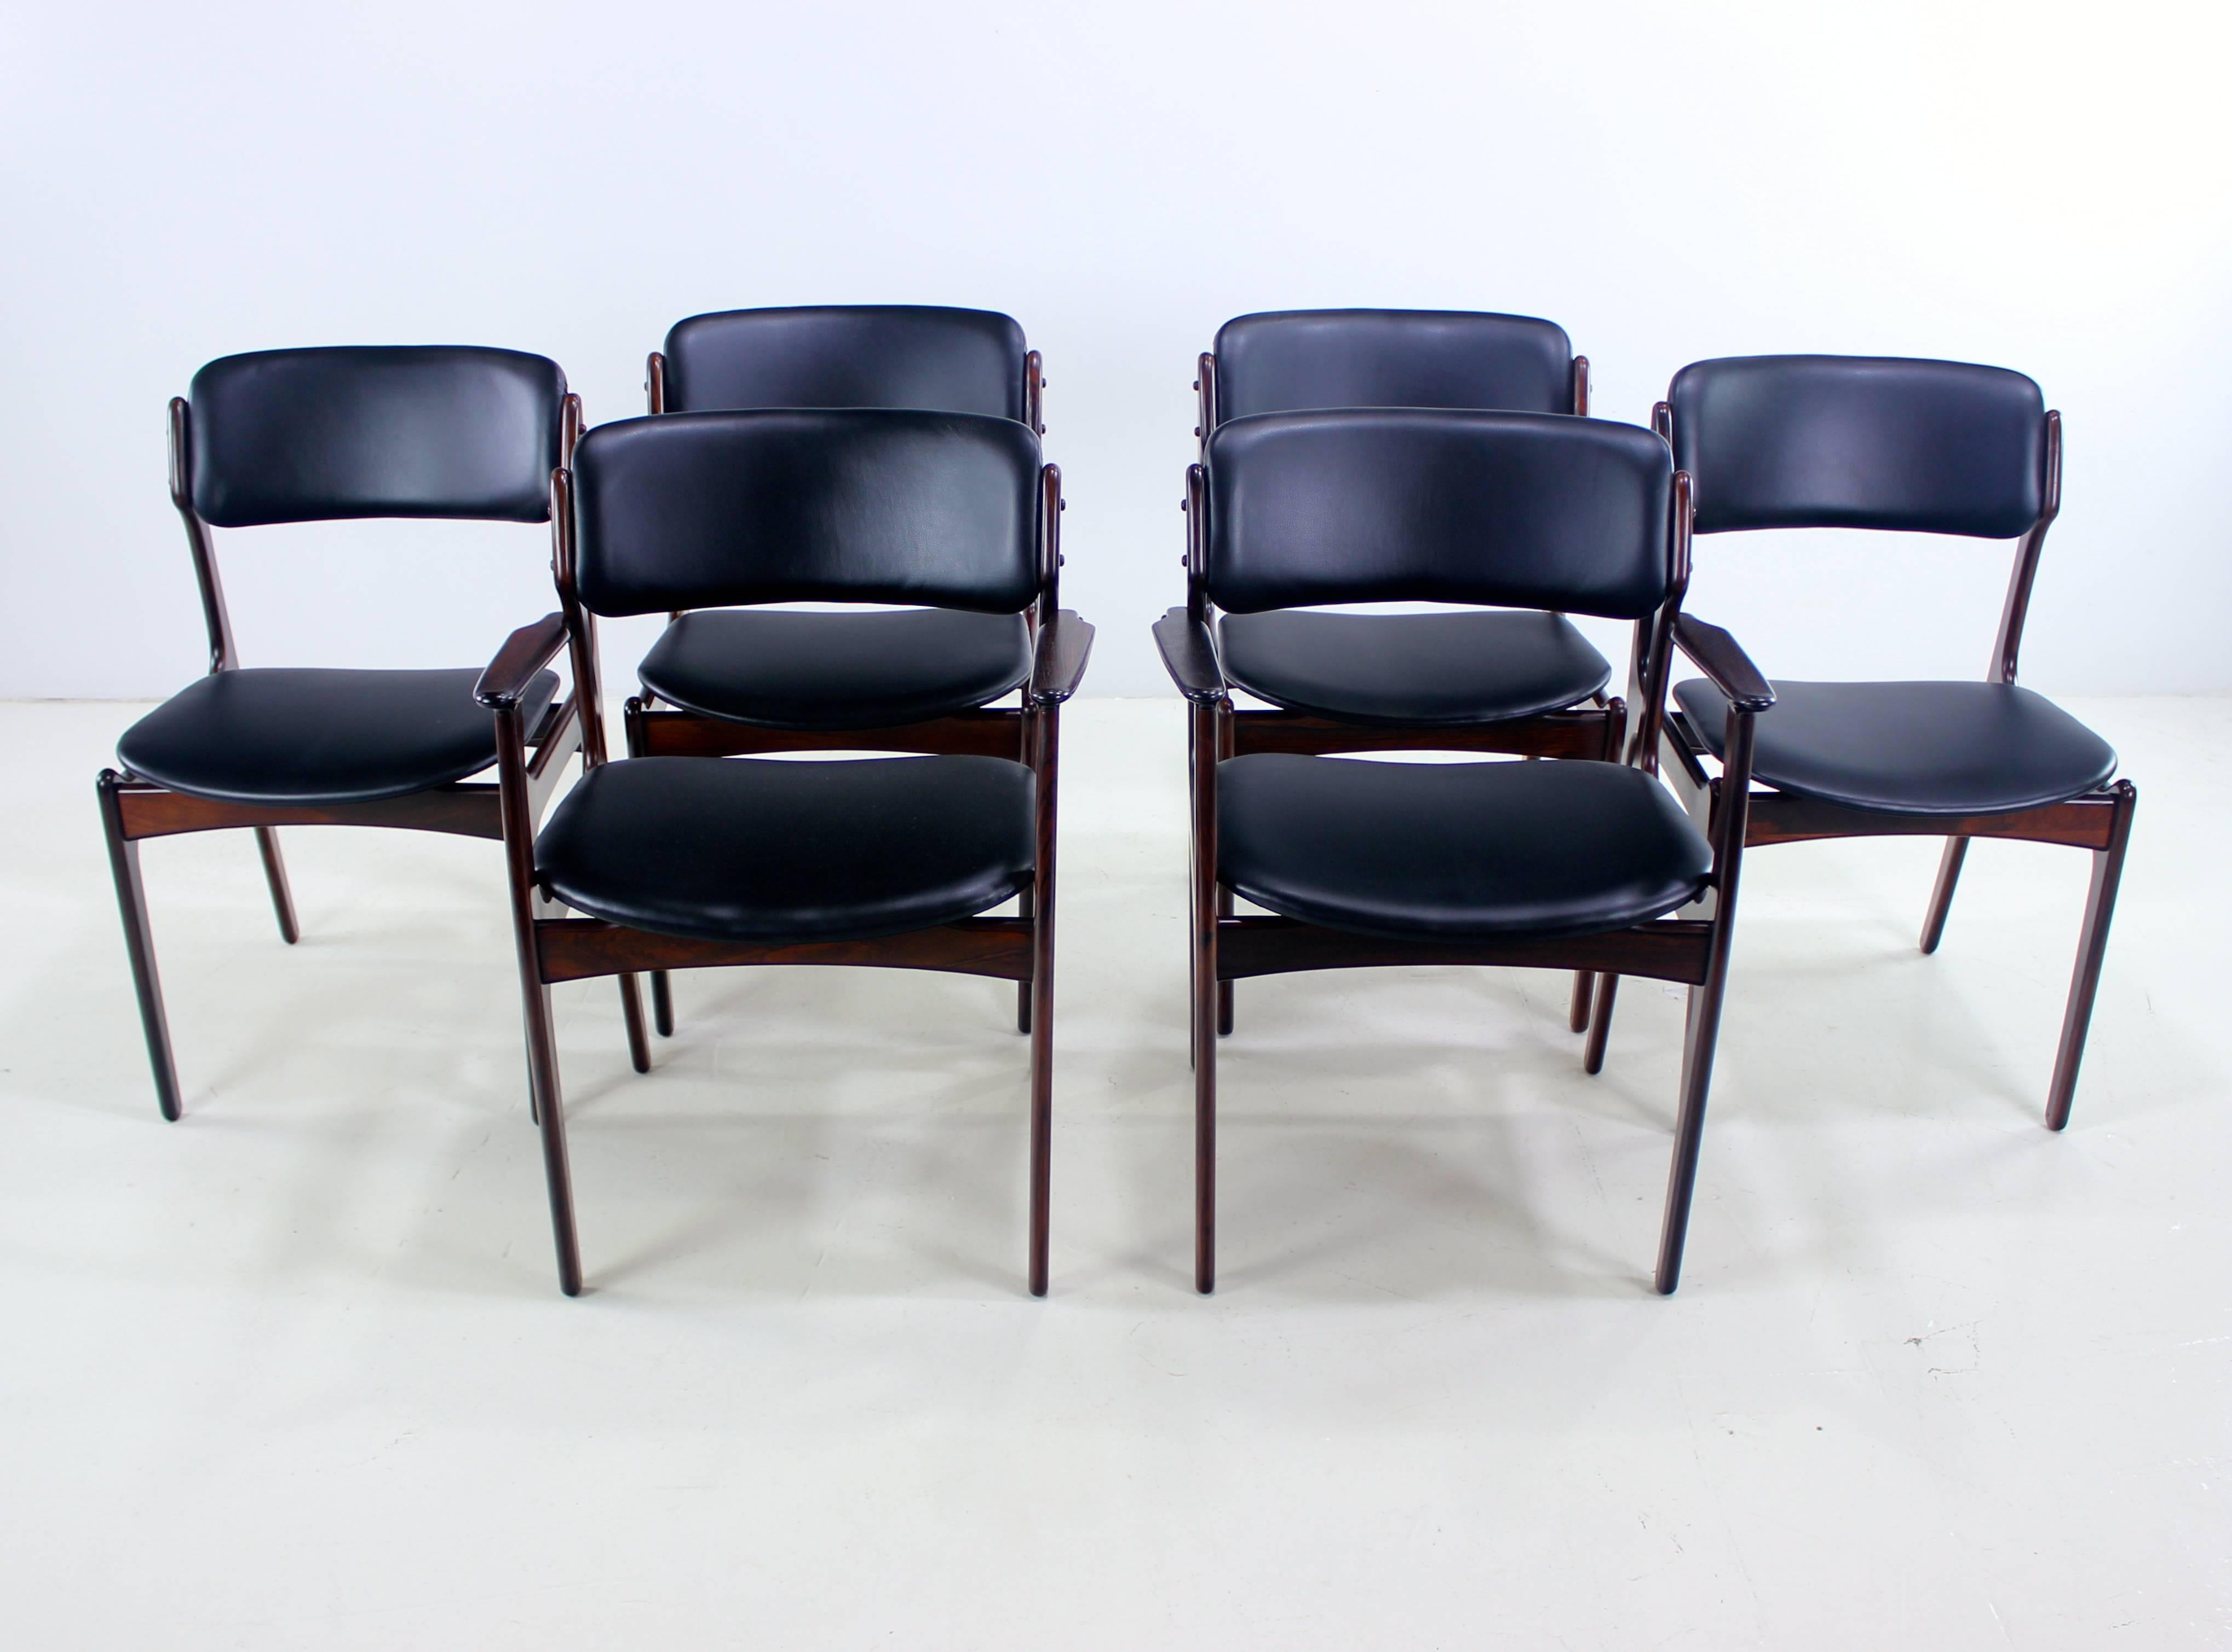 Six Danish modern dining chairs designed by Erik Buck. O.D Mobler A/S, maker.
Rich rosewood frames.
Floating seats and backs newly upholstered in highest quality black leatherette.
Superior comfort.
Includes two armchairs measuring 23.75" W